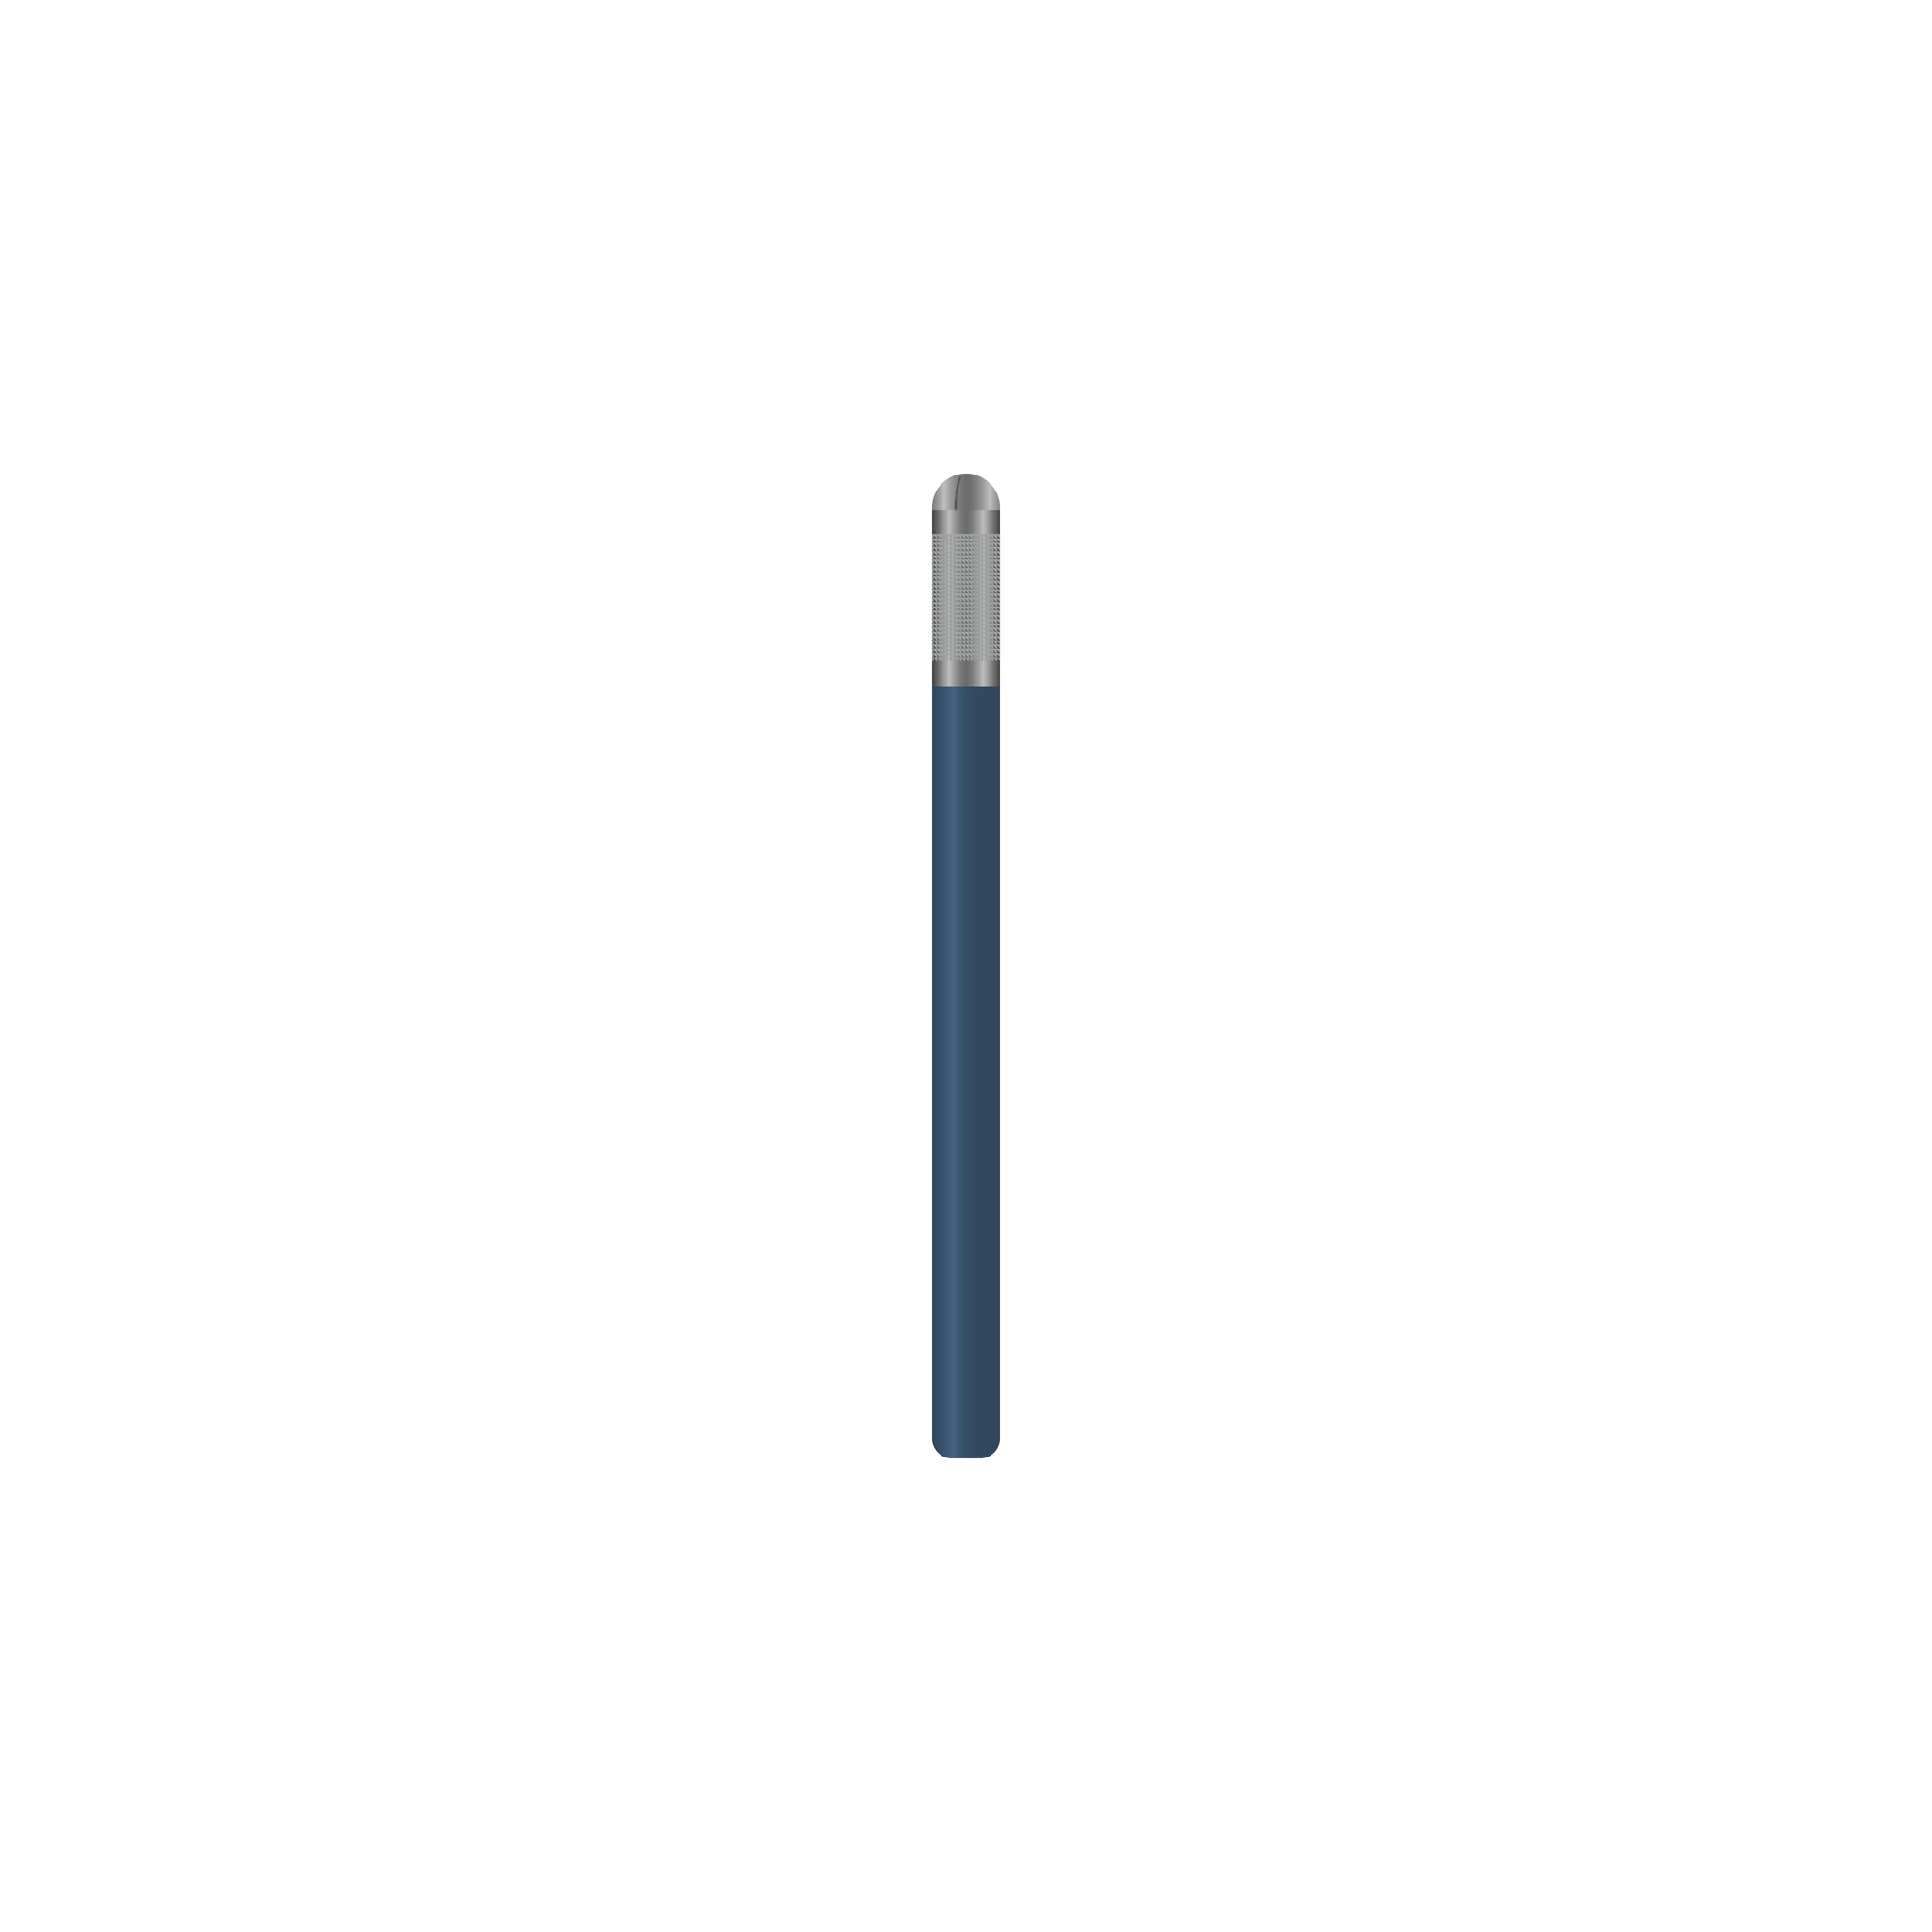 A vertical blue metal brush handle with a stainless steel top. Opening is in an ‘X’ shape to place a brush handle into.